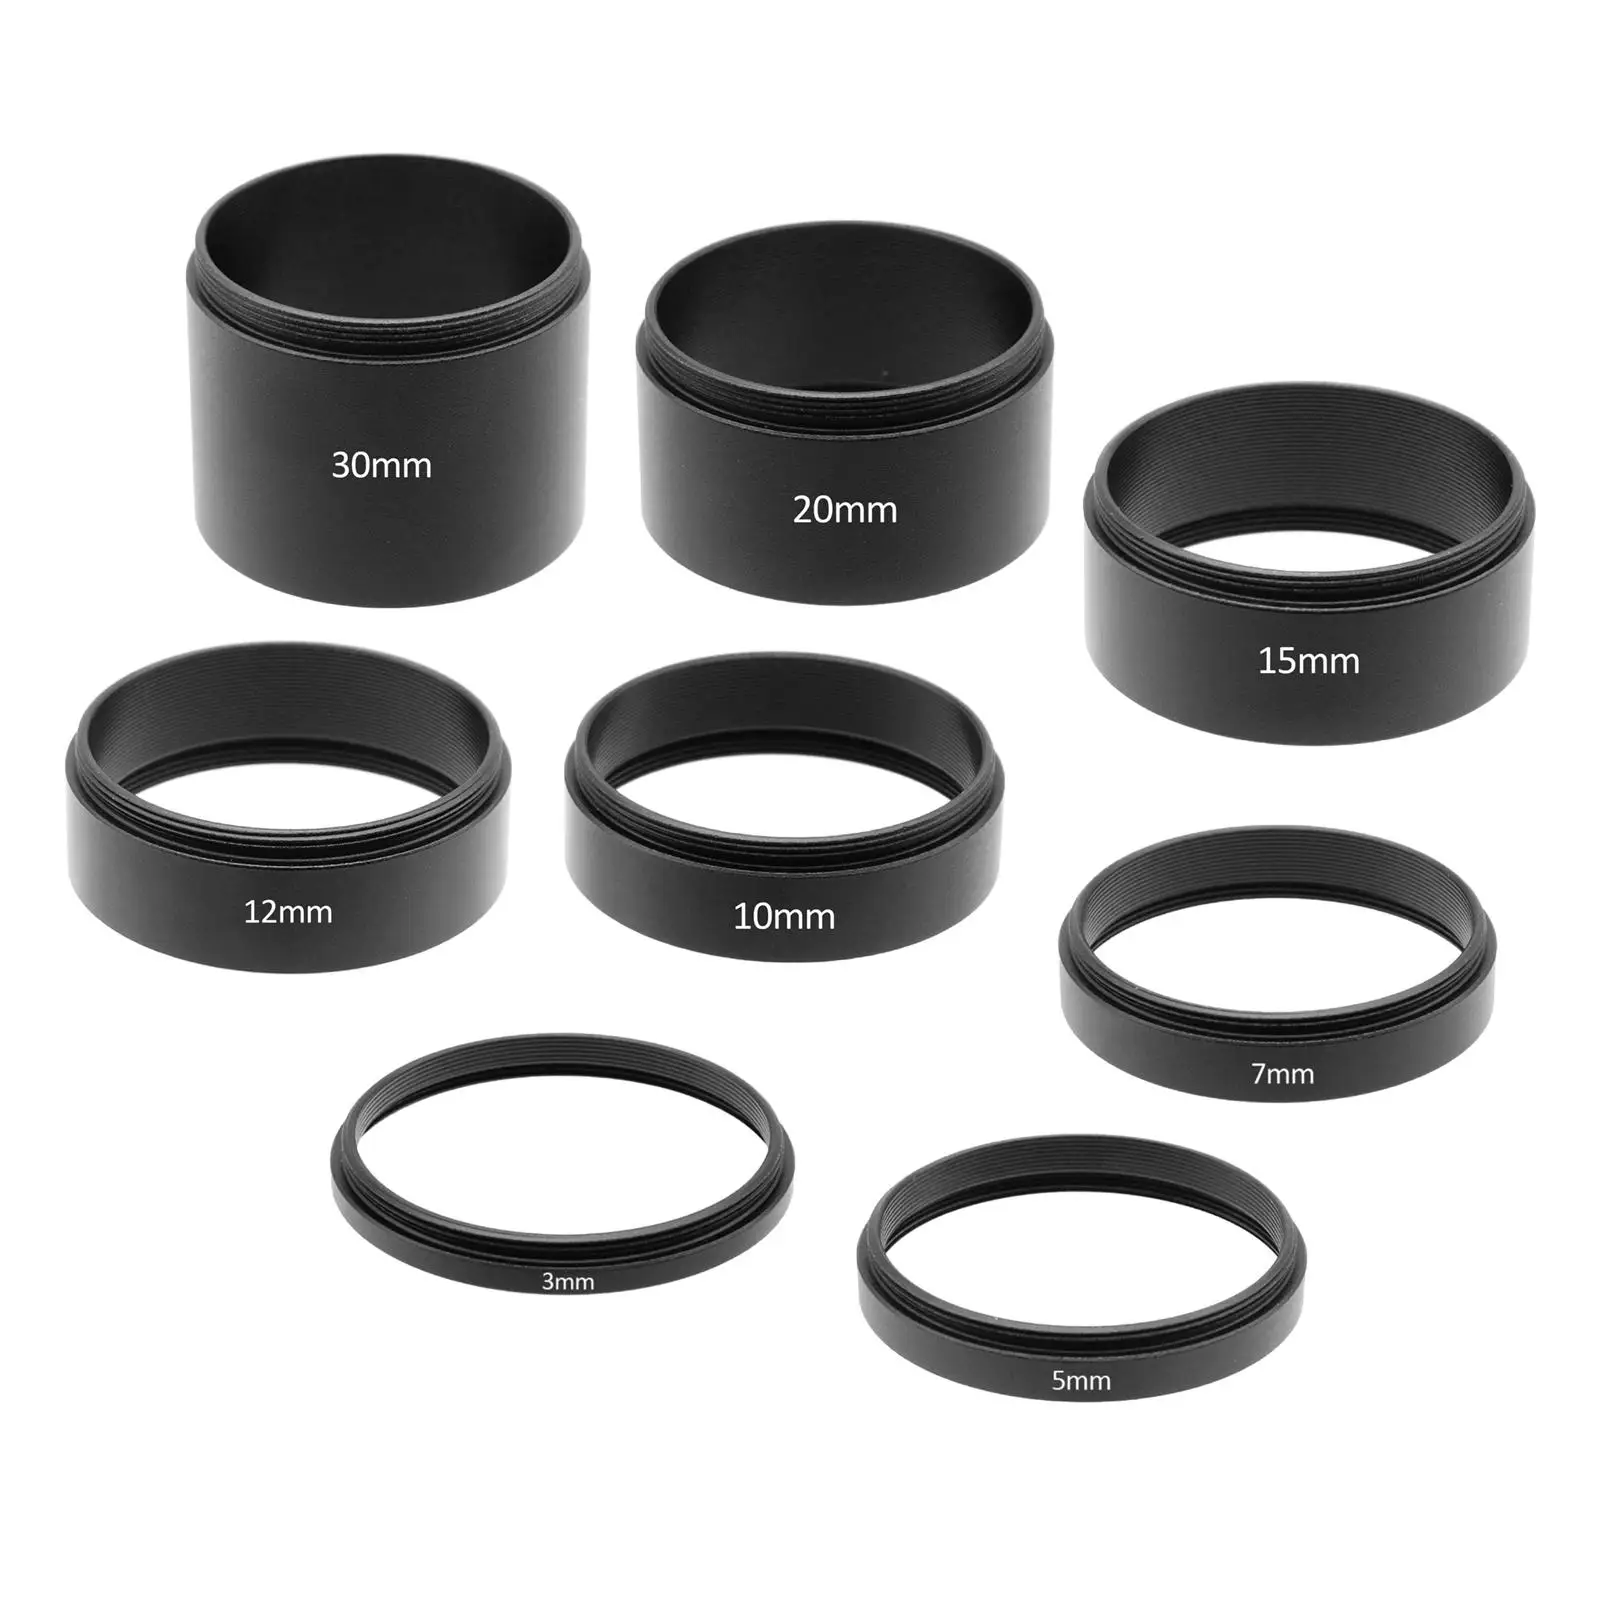 T2 Extension Tube Photography Accs M42x0.75 Thread Easy to Install Supplies Premium Wide T2 Thread Extension Tube for Slr Camera